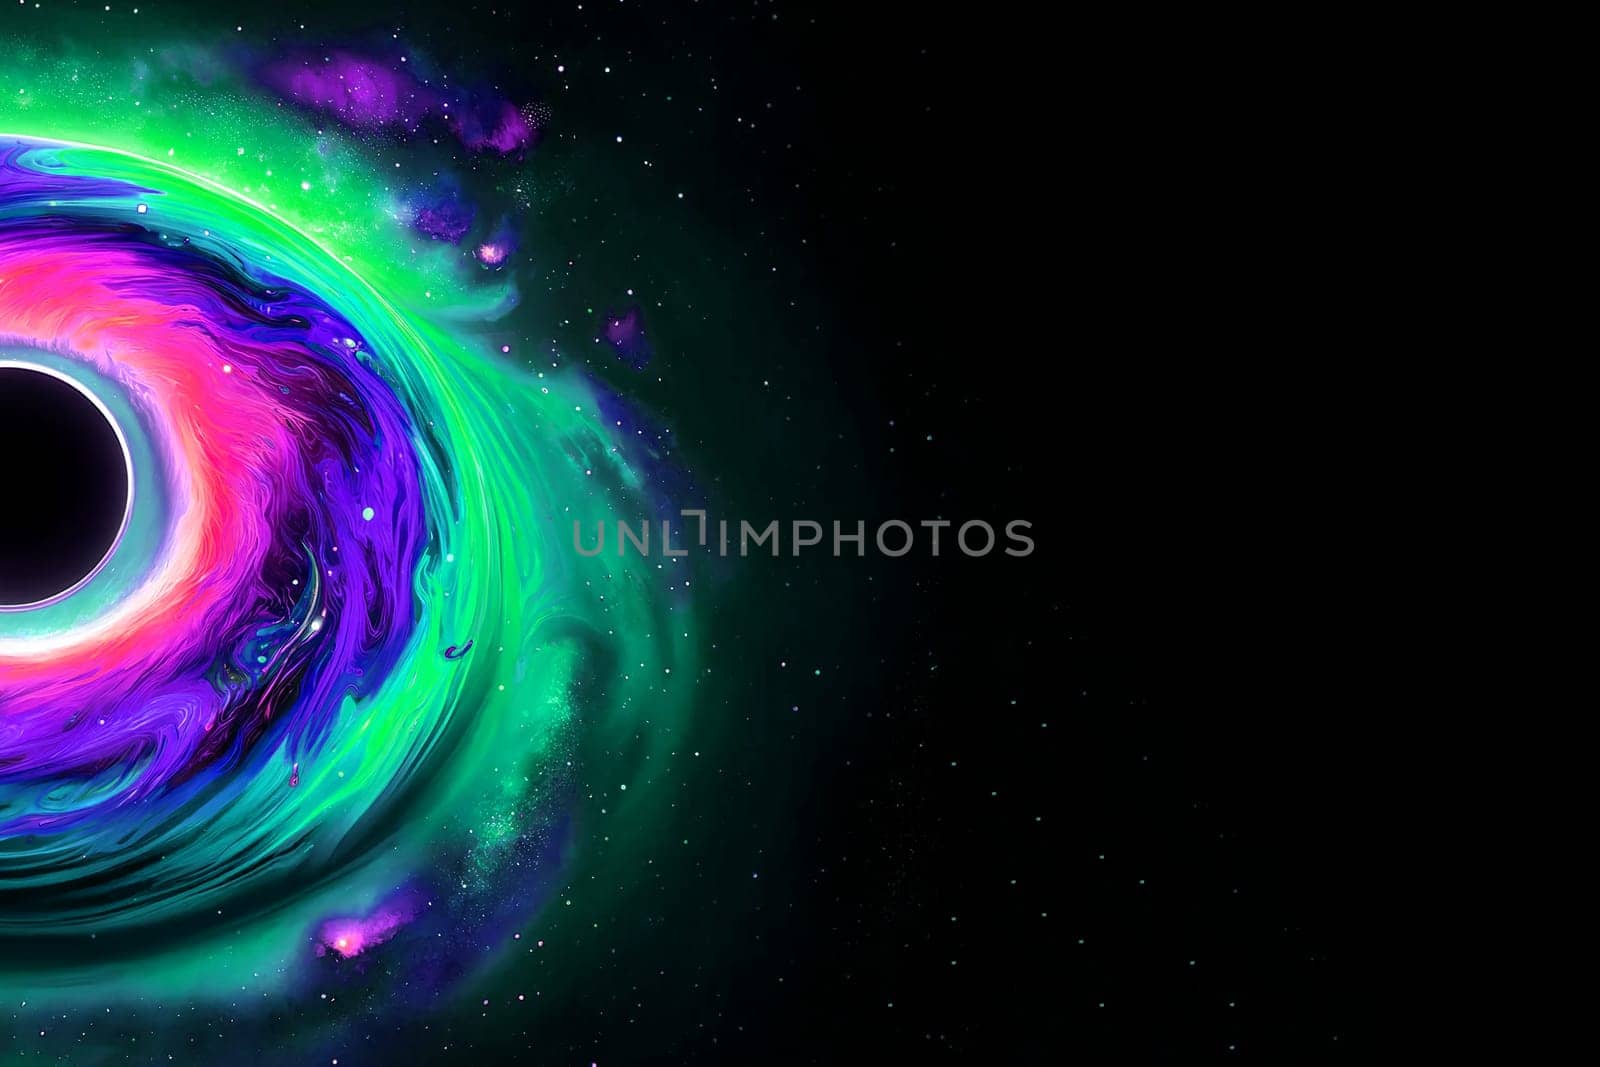 half colorful image of a black hole with a rotating accretion disk in space, copy space.